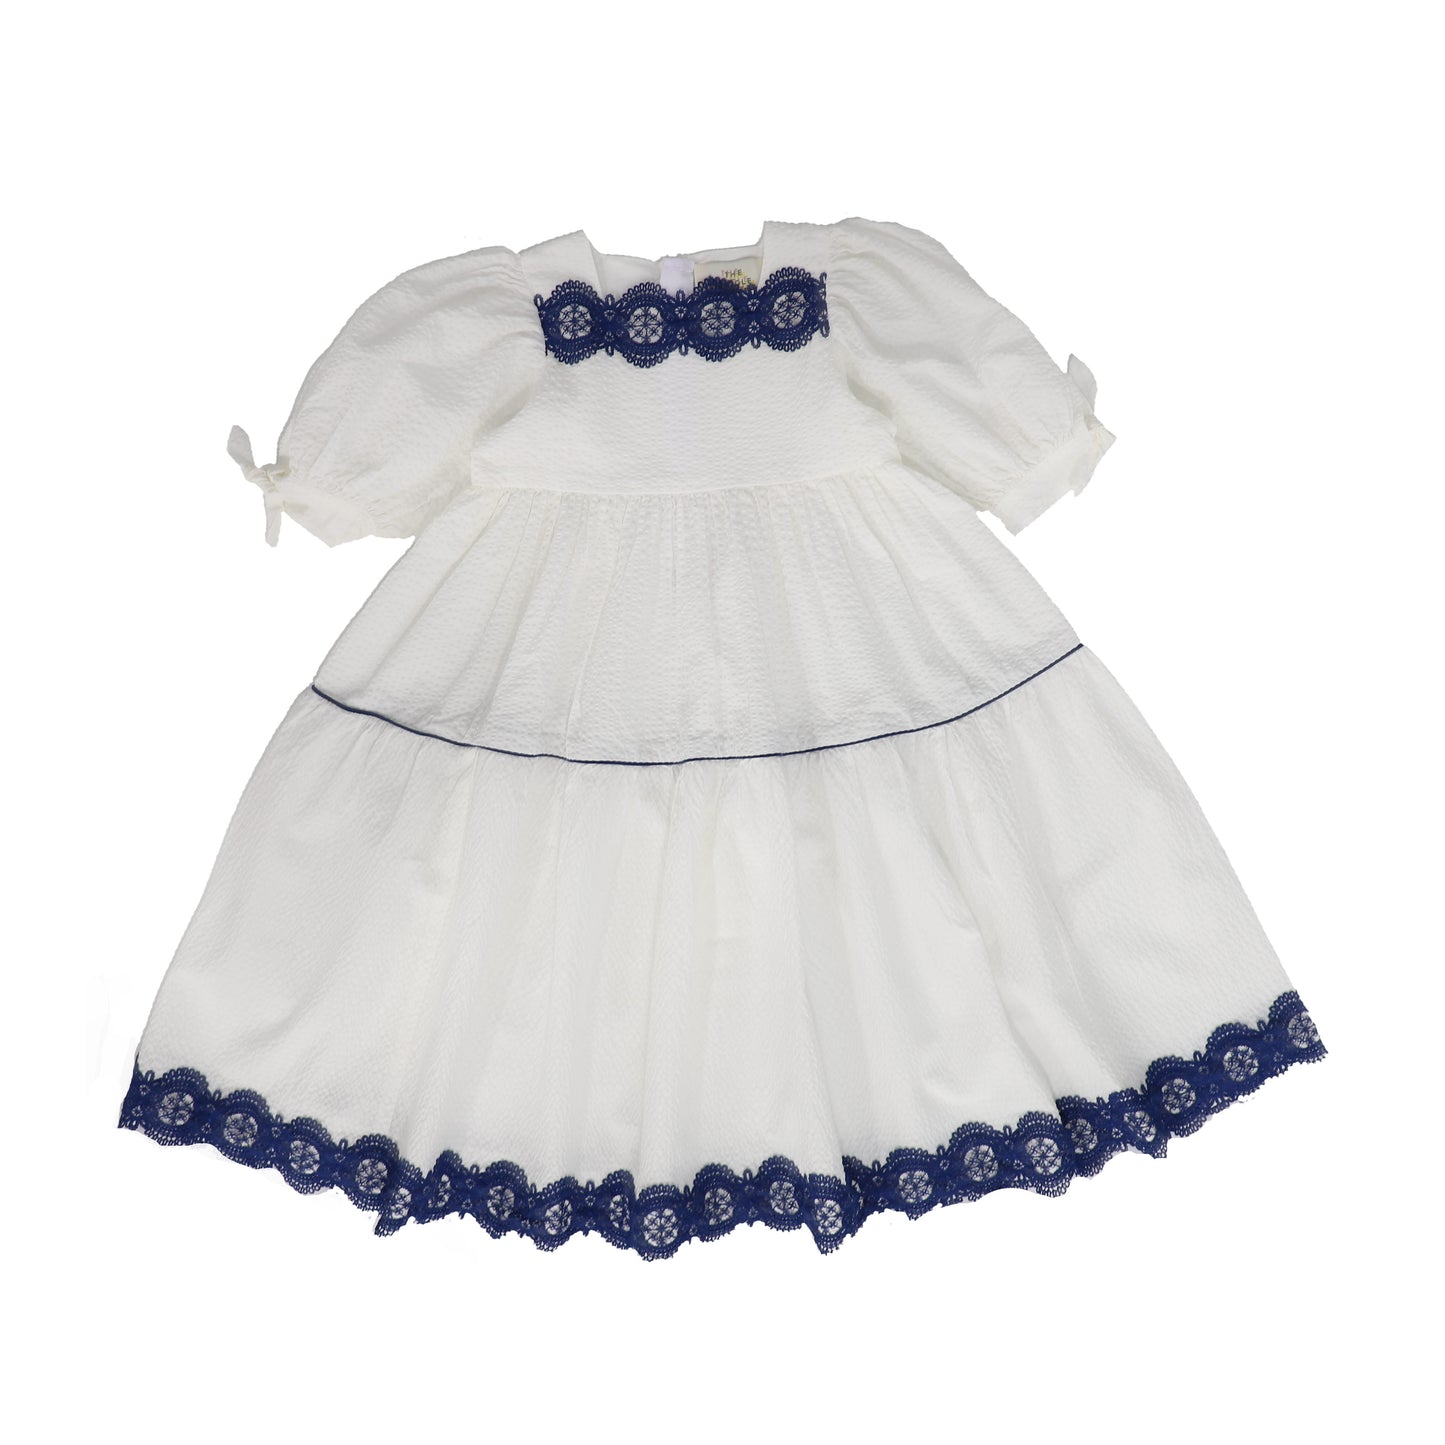 THE MIDDLE DAUGHTER WHITE/NAVY LACE TRIM PUFF SLEEVE DRESS [FINAL SALE]